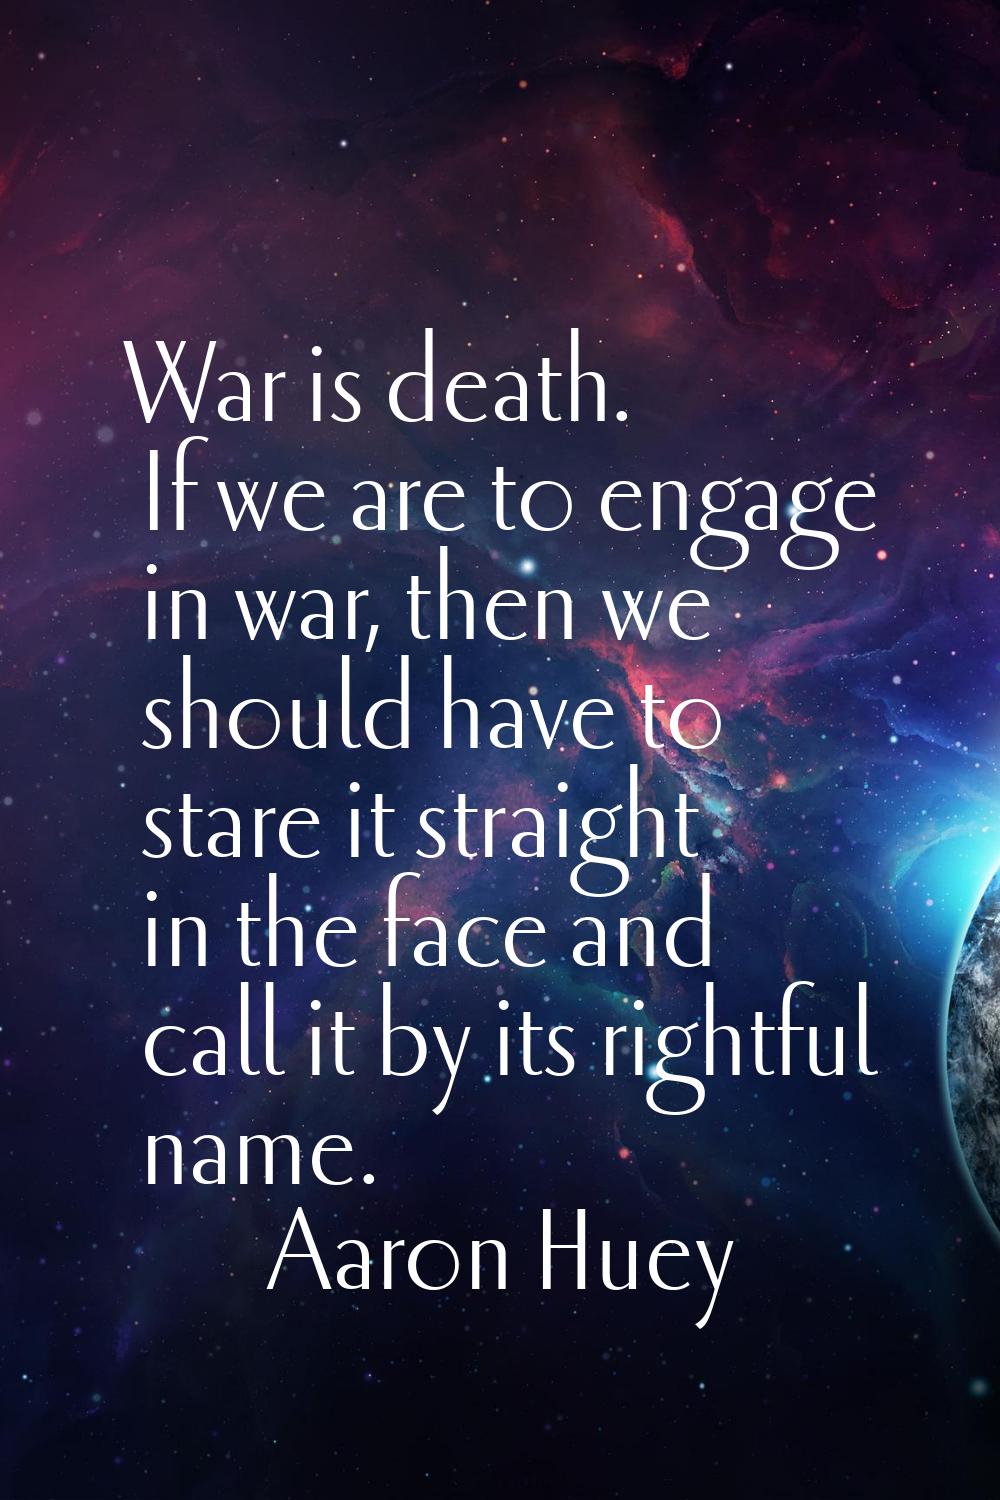 War is death. If we are to engage in war, then we should have to stare it straight in the face and 